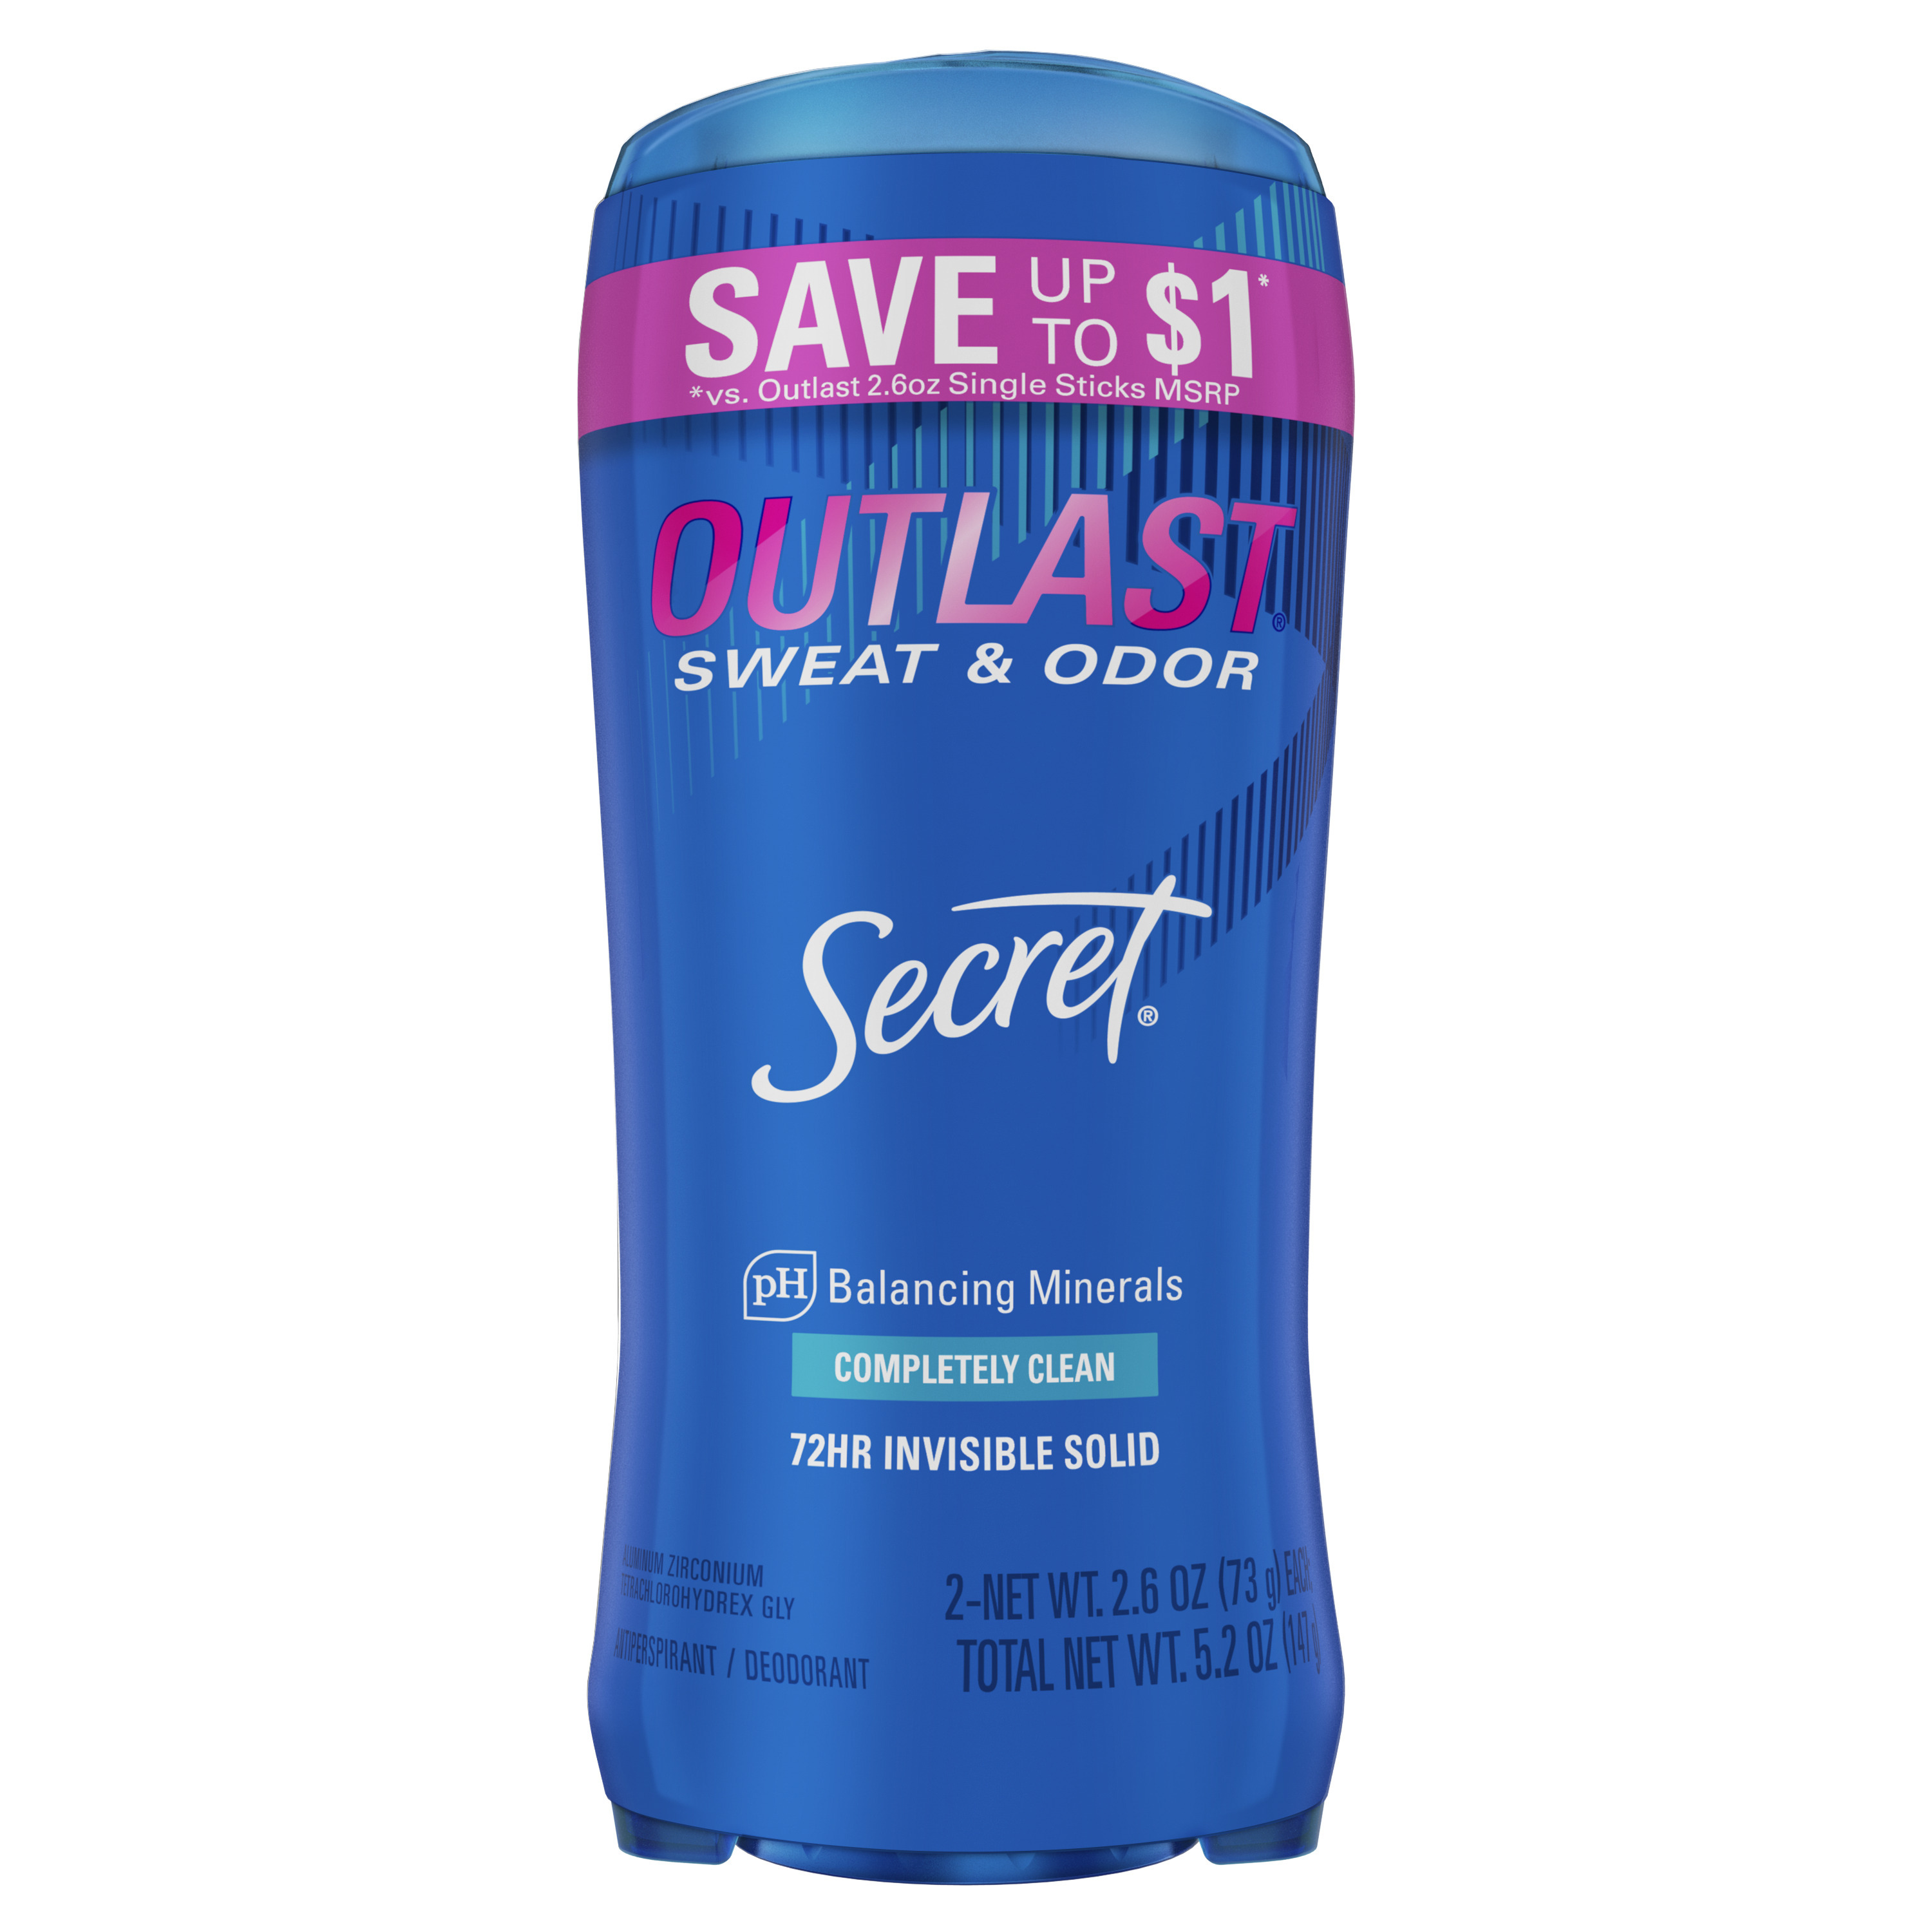 Secret Outlast Invisible Solid Antiperspirant and Deodorant Completely Clean, 2.6 oz Pack of 2 - image 8 of 9